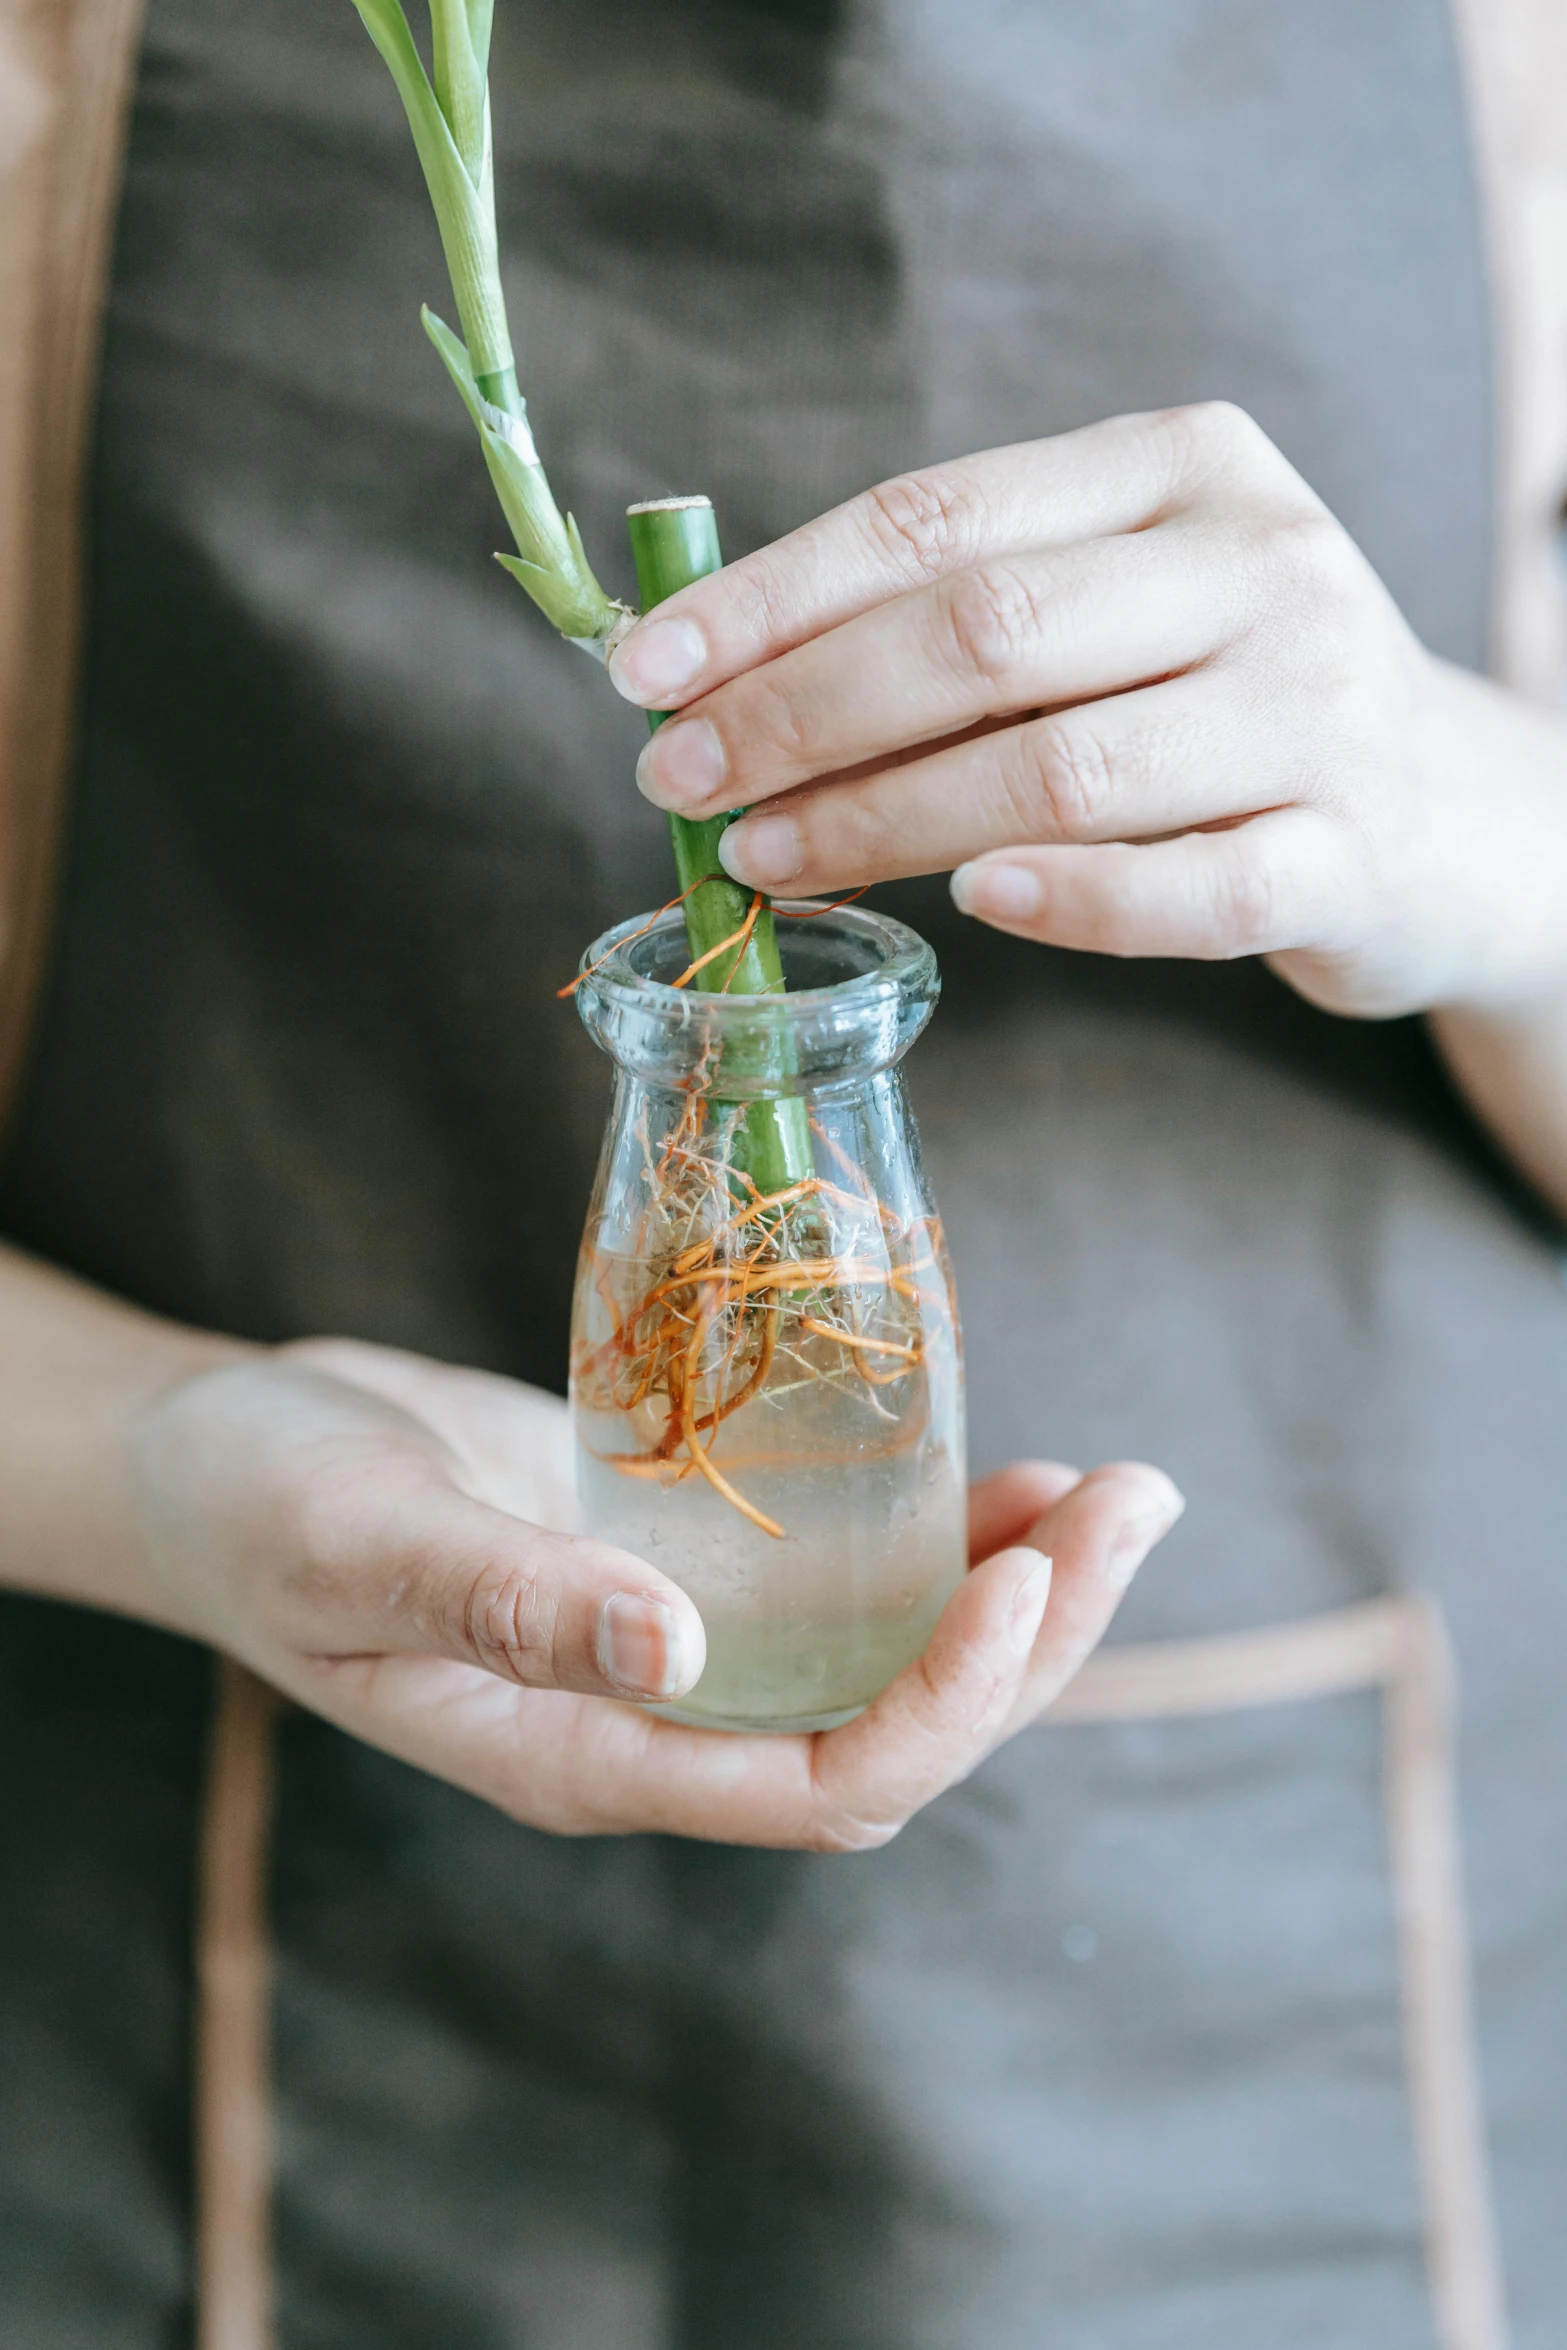 a person holding a jar with a plant in it, plating, stems, made of bamboo, crisp and clear